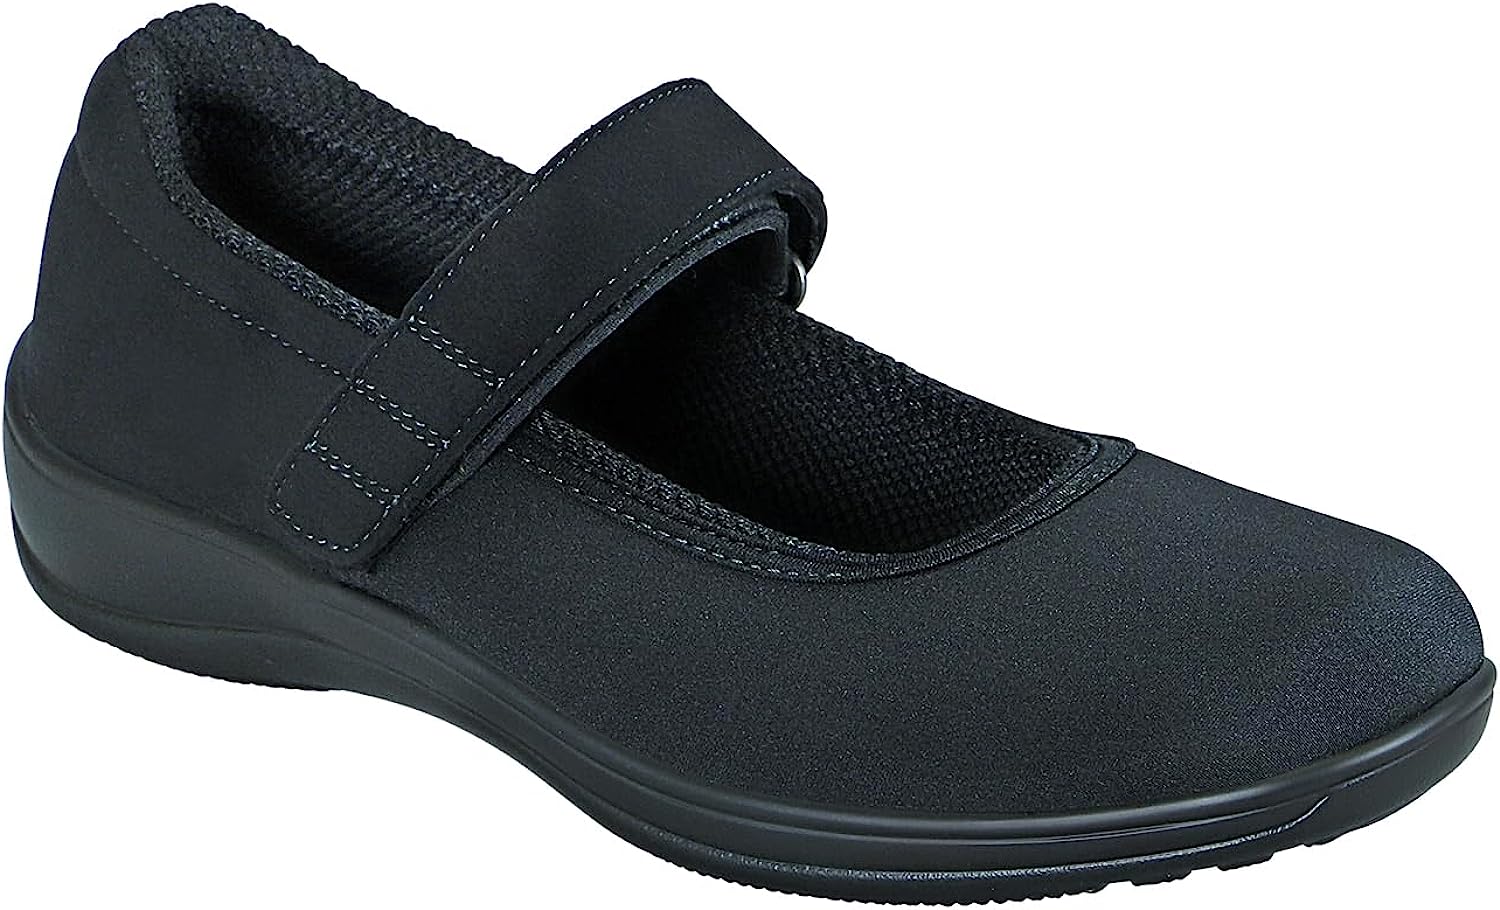 Orthofeet Innovative Diabetic Shoes for Women - Proven [...]